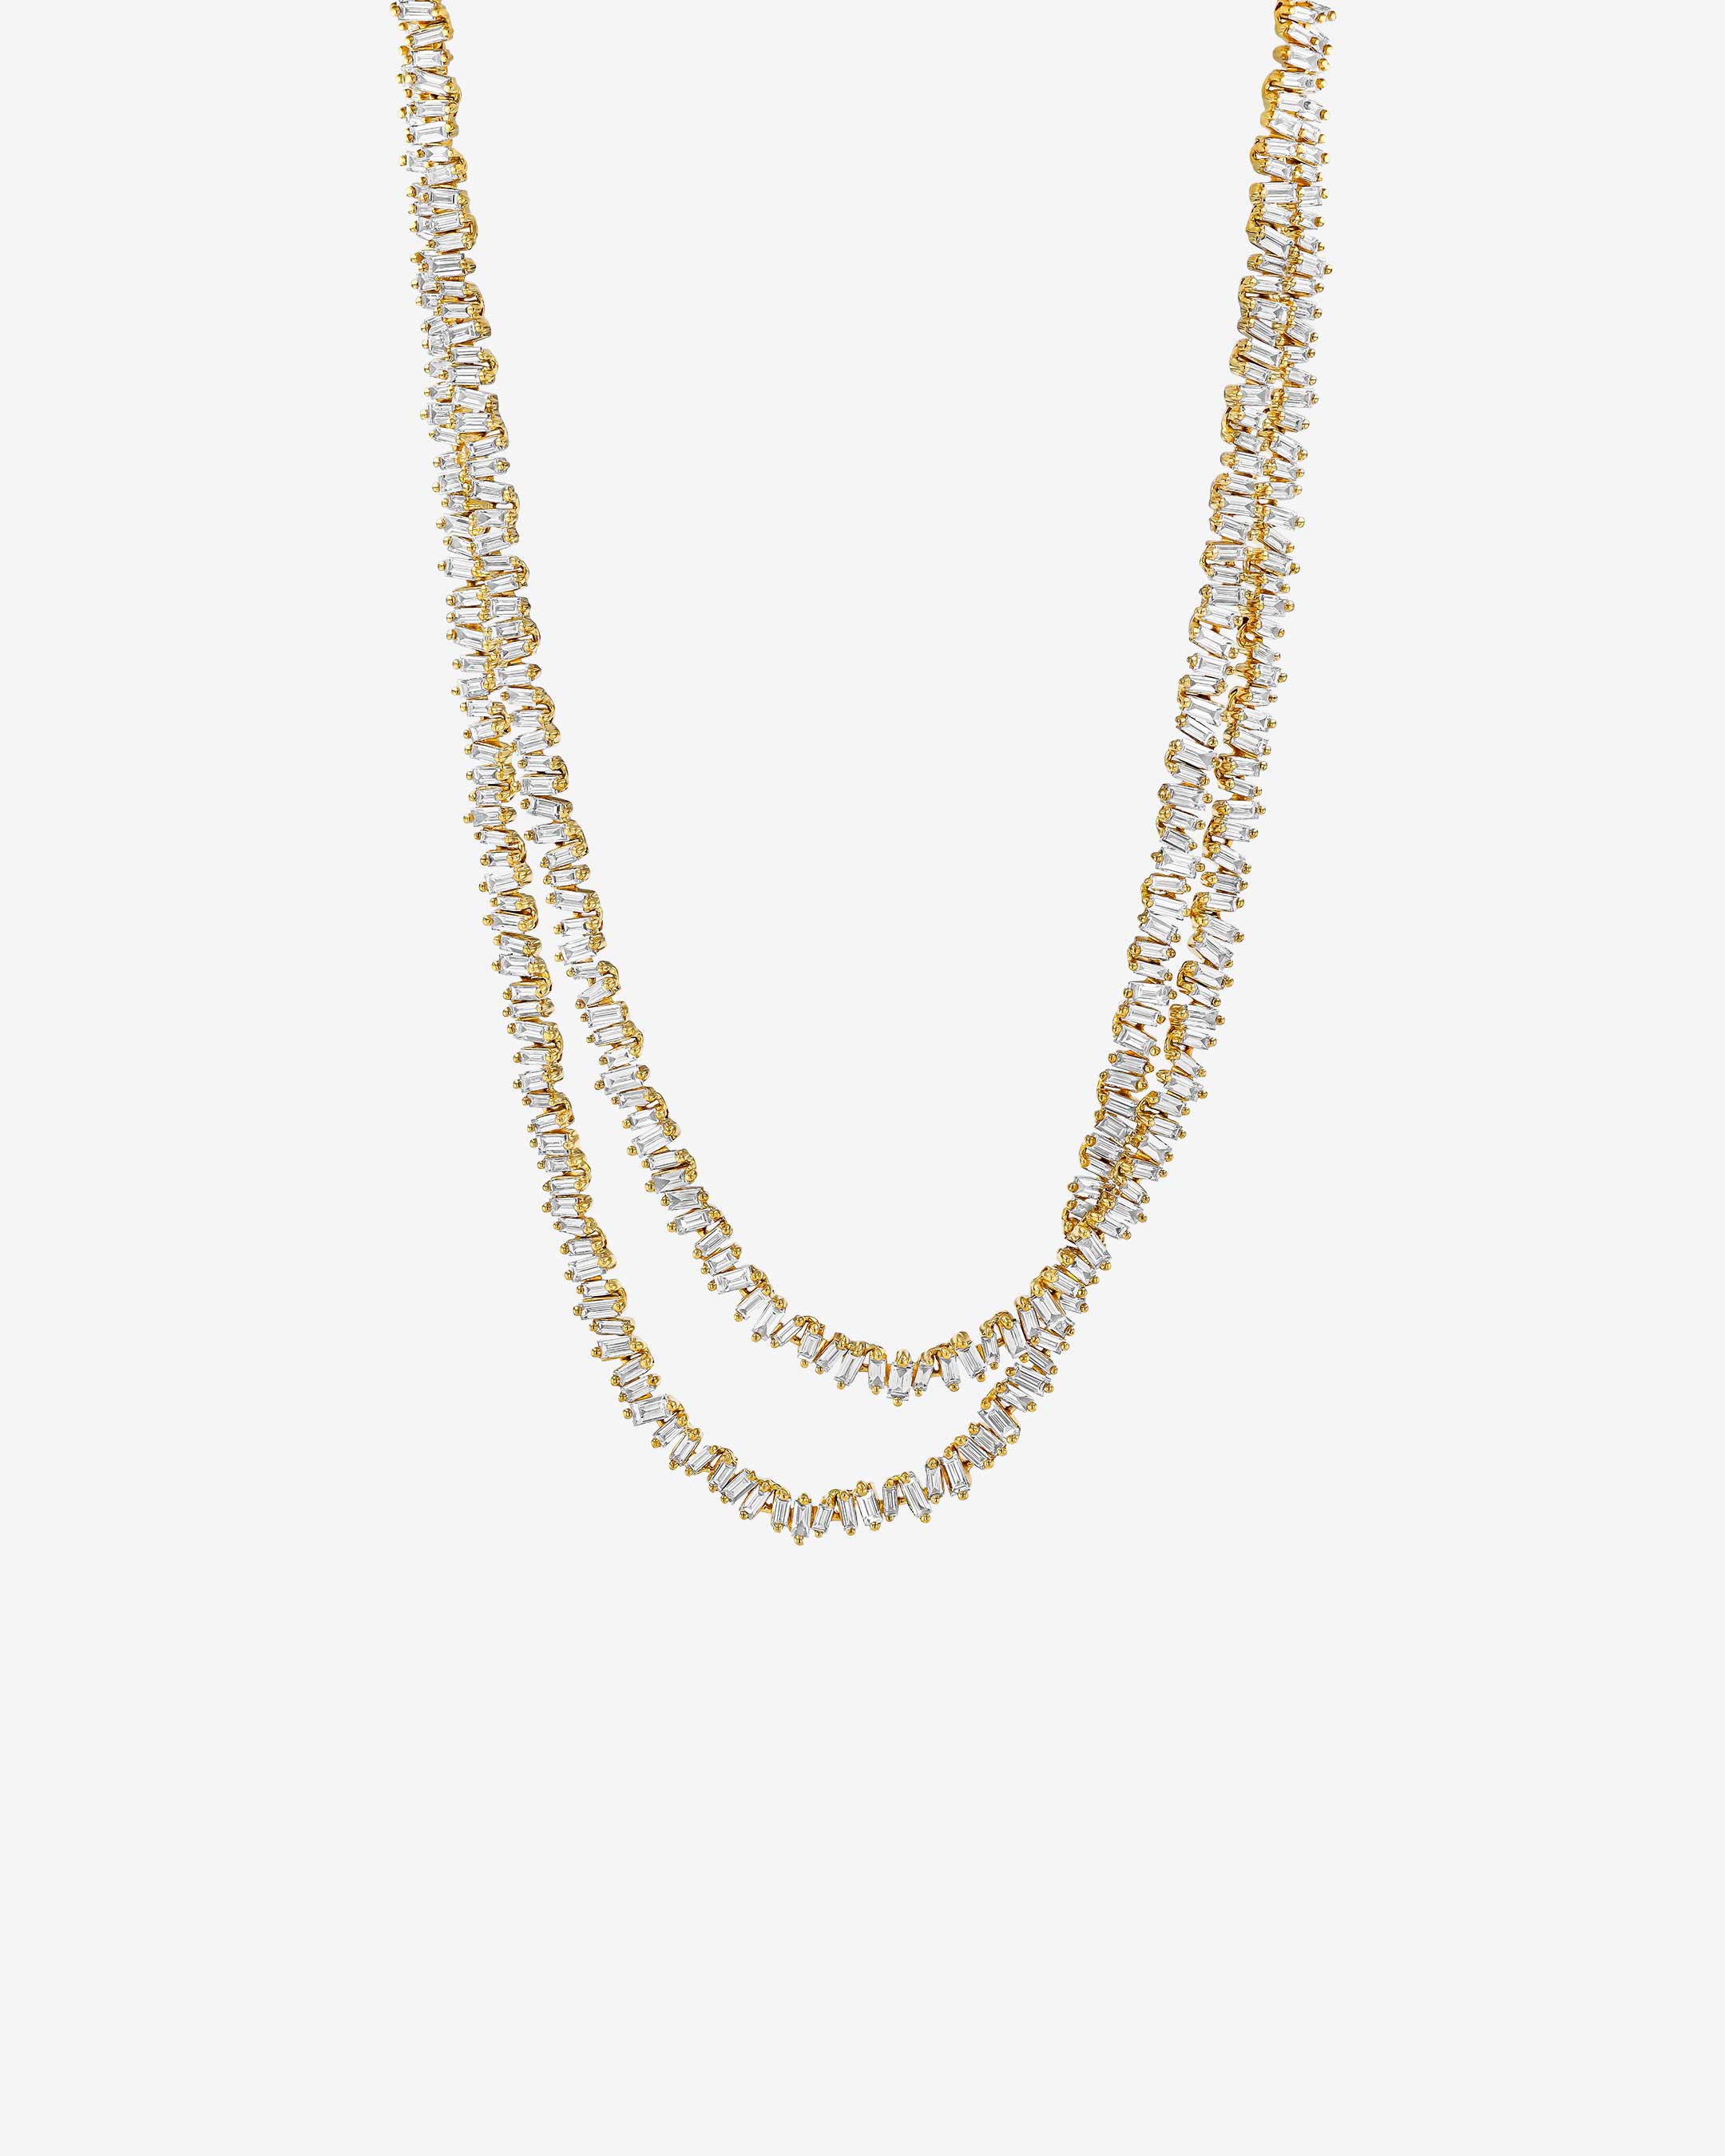 Suzanne Kalan Classic Diamond 36" Inch Mini Baguette Tennis Necklace in 18k yellow gold